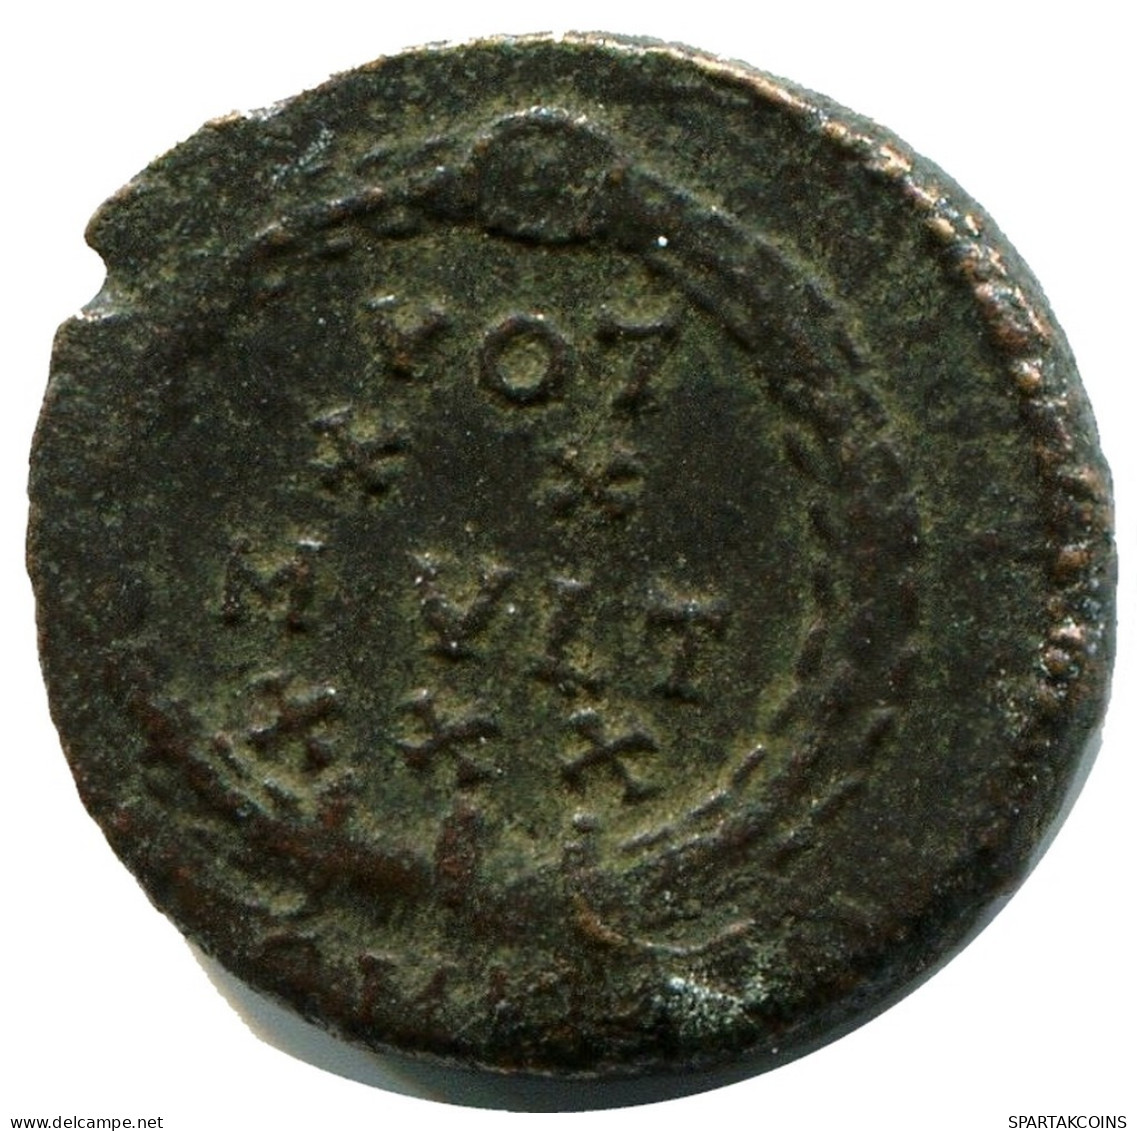 CONSTANS MINTED IN CYZICUS FROM THE ROYAL ONTARIO MUSEUM #ANC11654.14.D.A - El Impero Christiano (307 / 363)